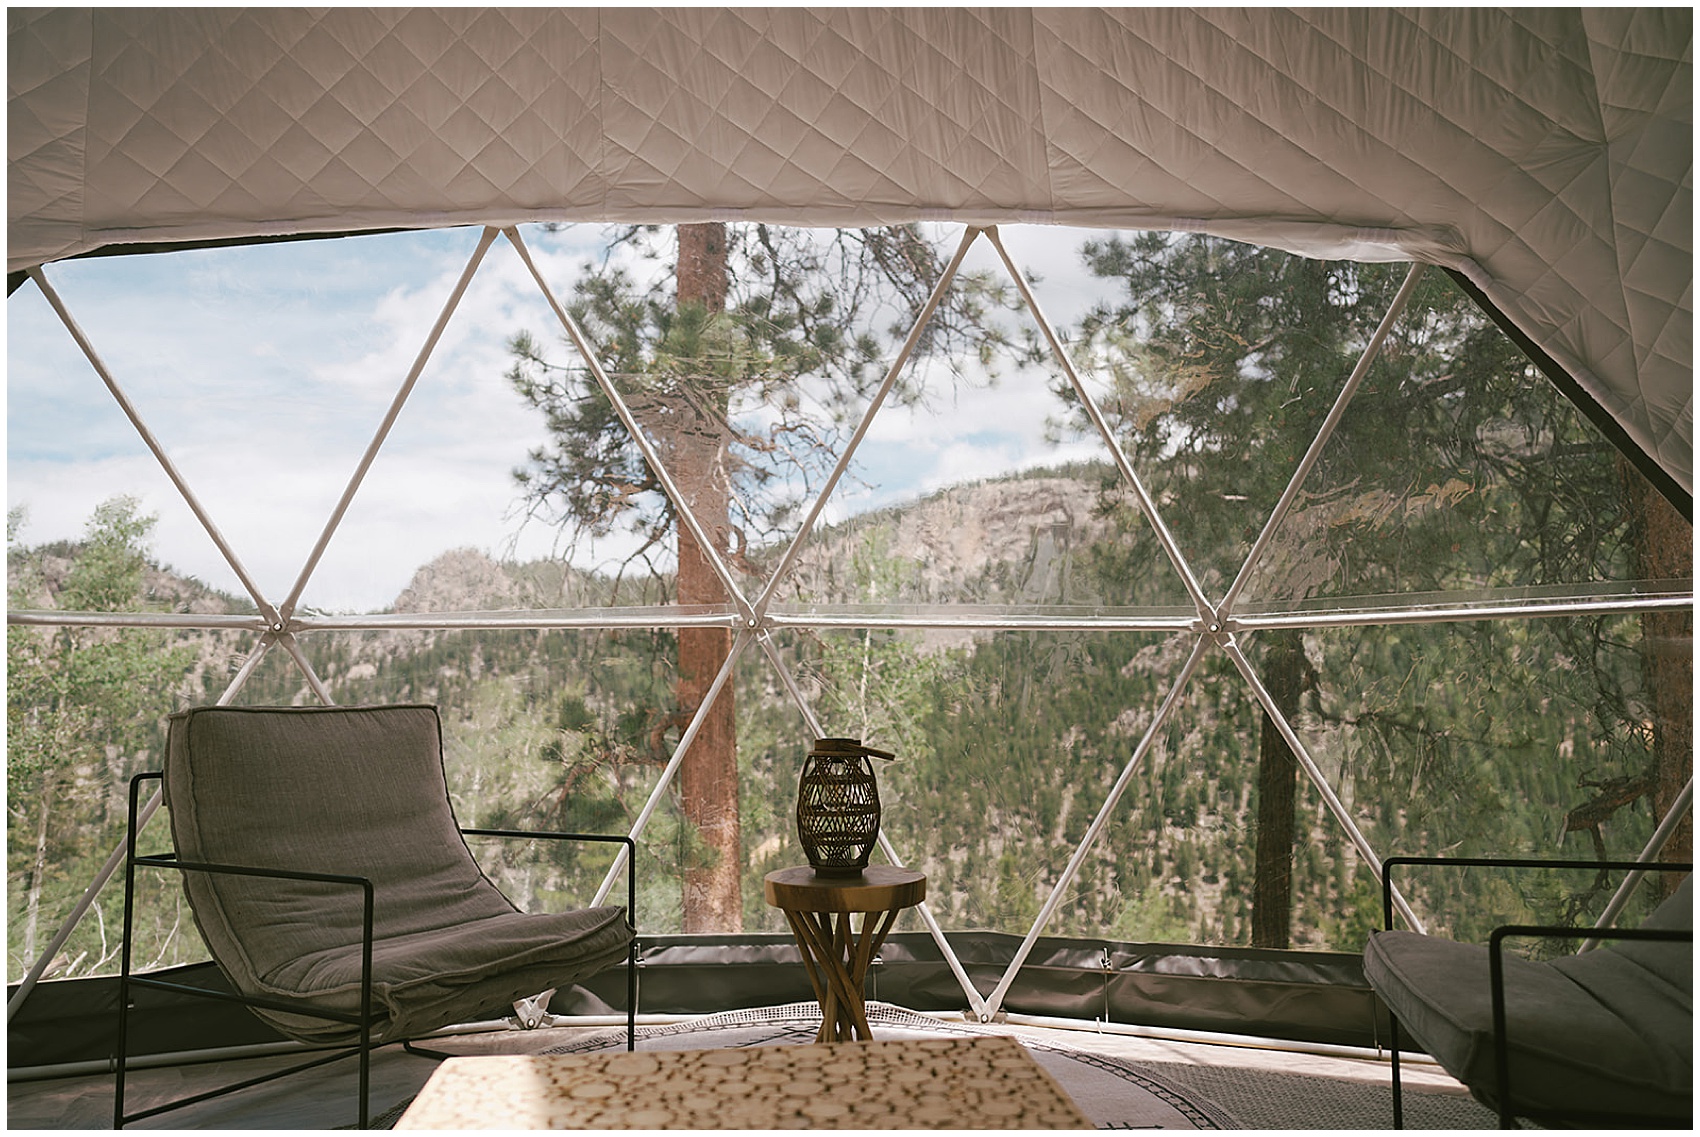 Details of the bridal suite overlooking the mountains